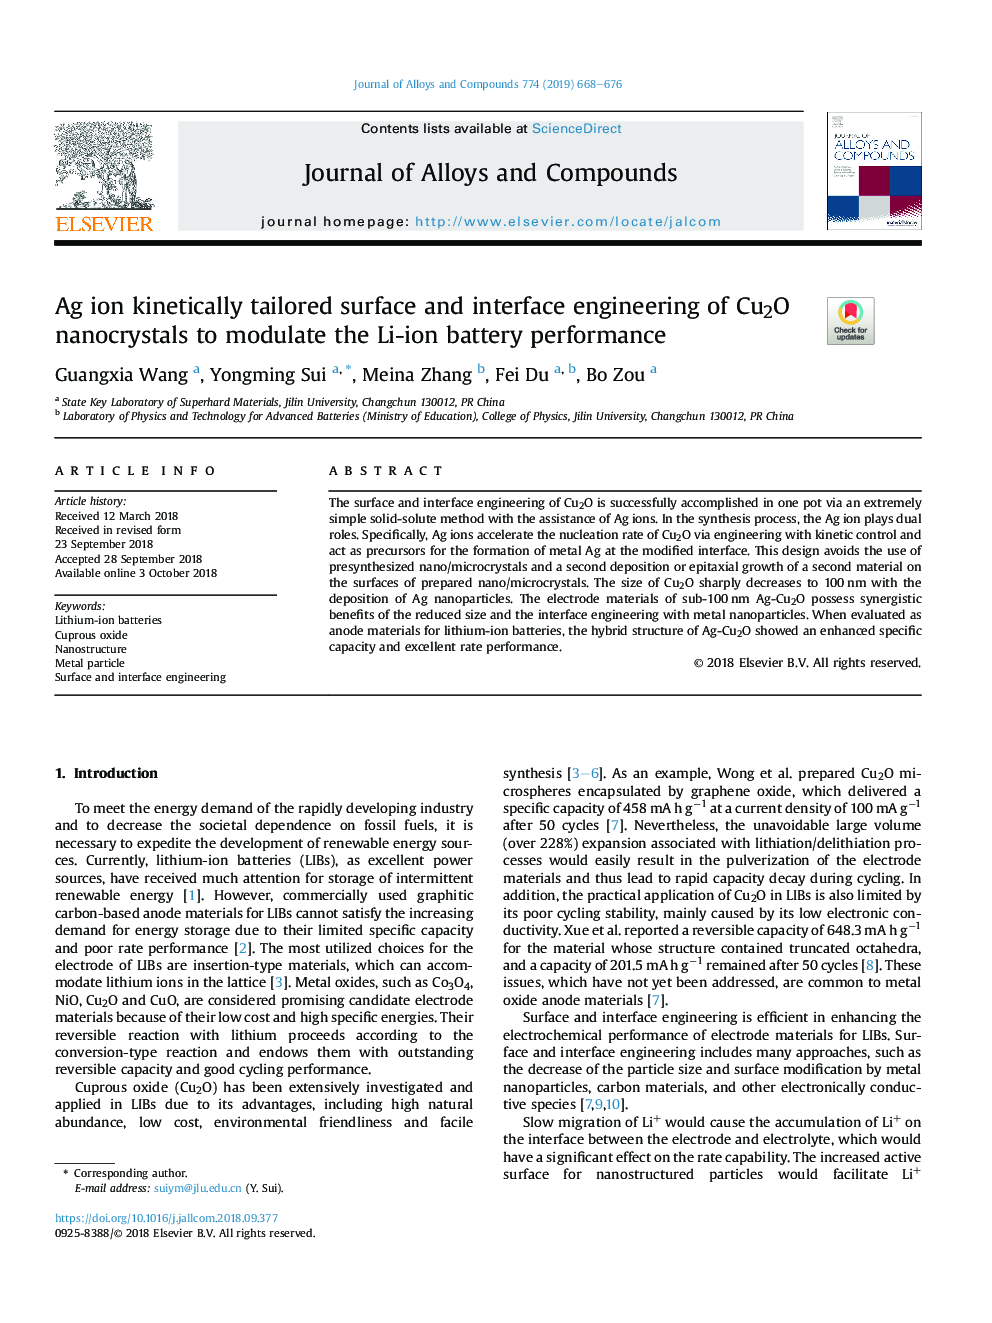 Ag ion kinetically tailored surface and interface engineering of Cu2O nanocrystals to modulate the Li-ion battery performance